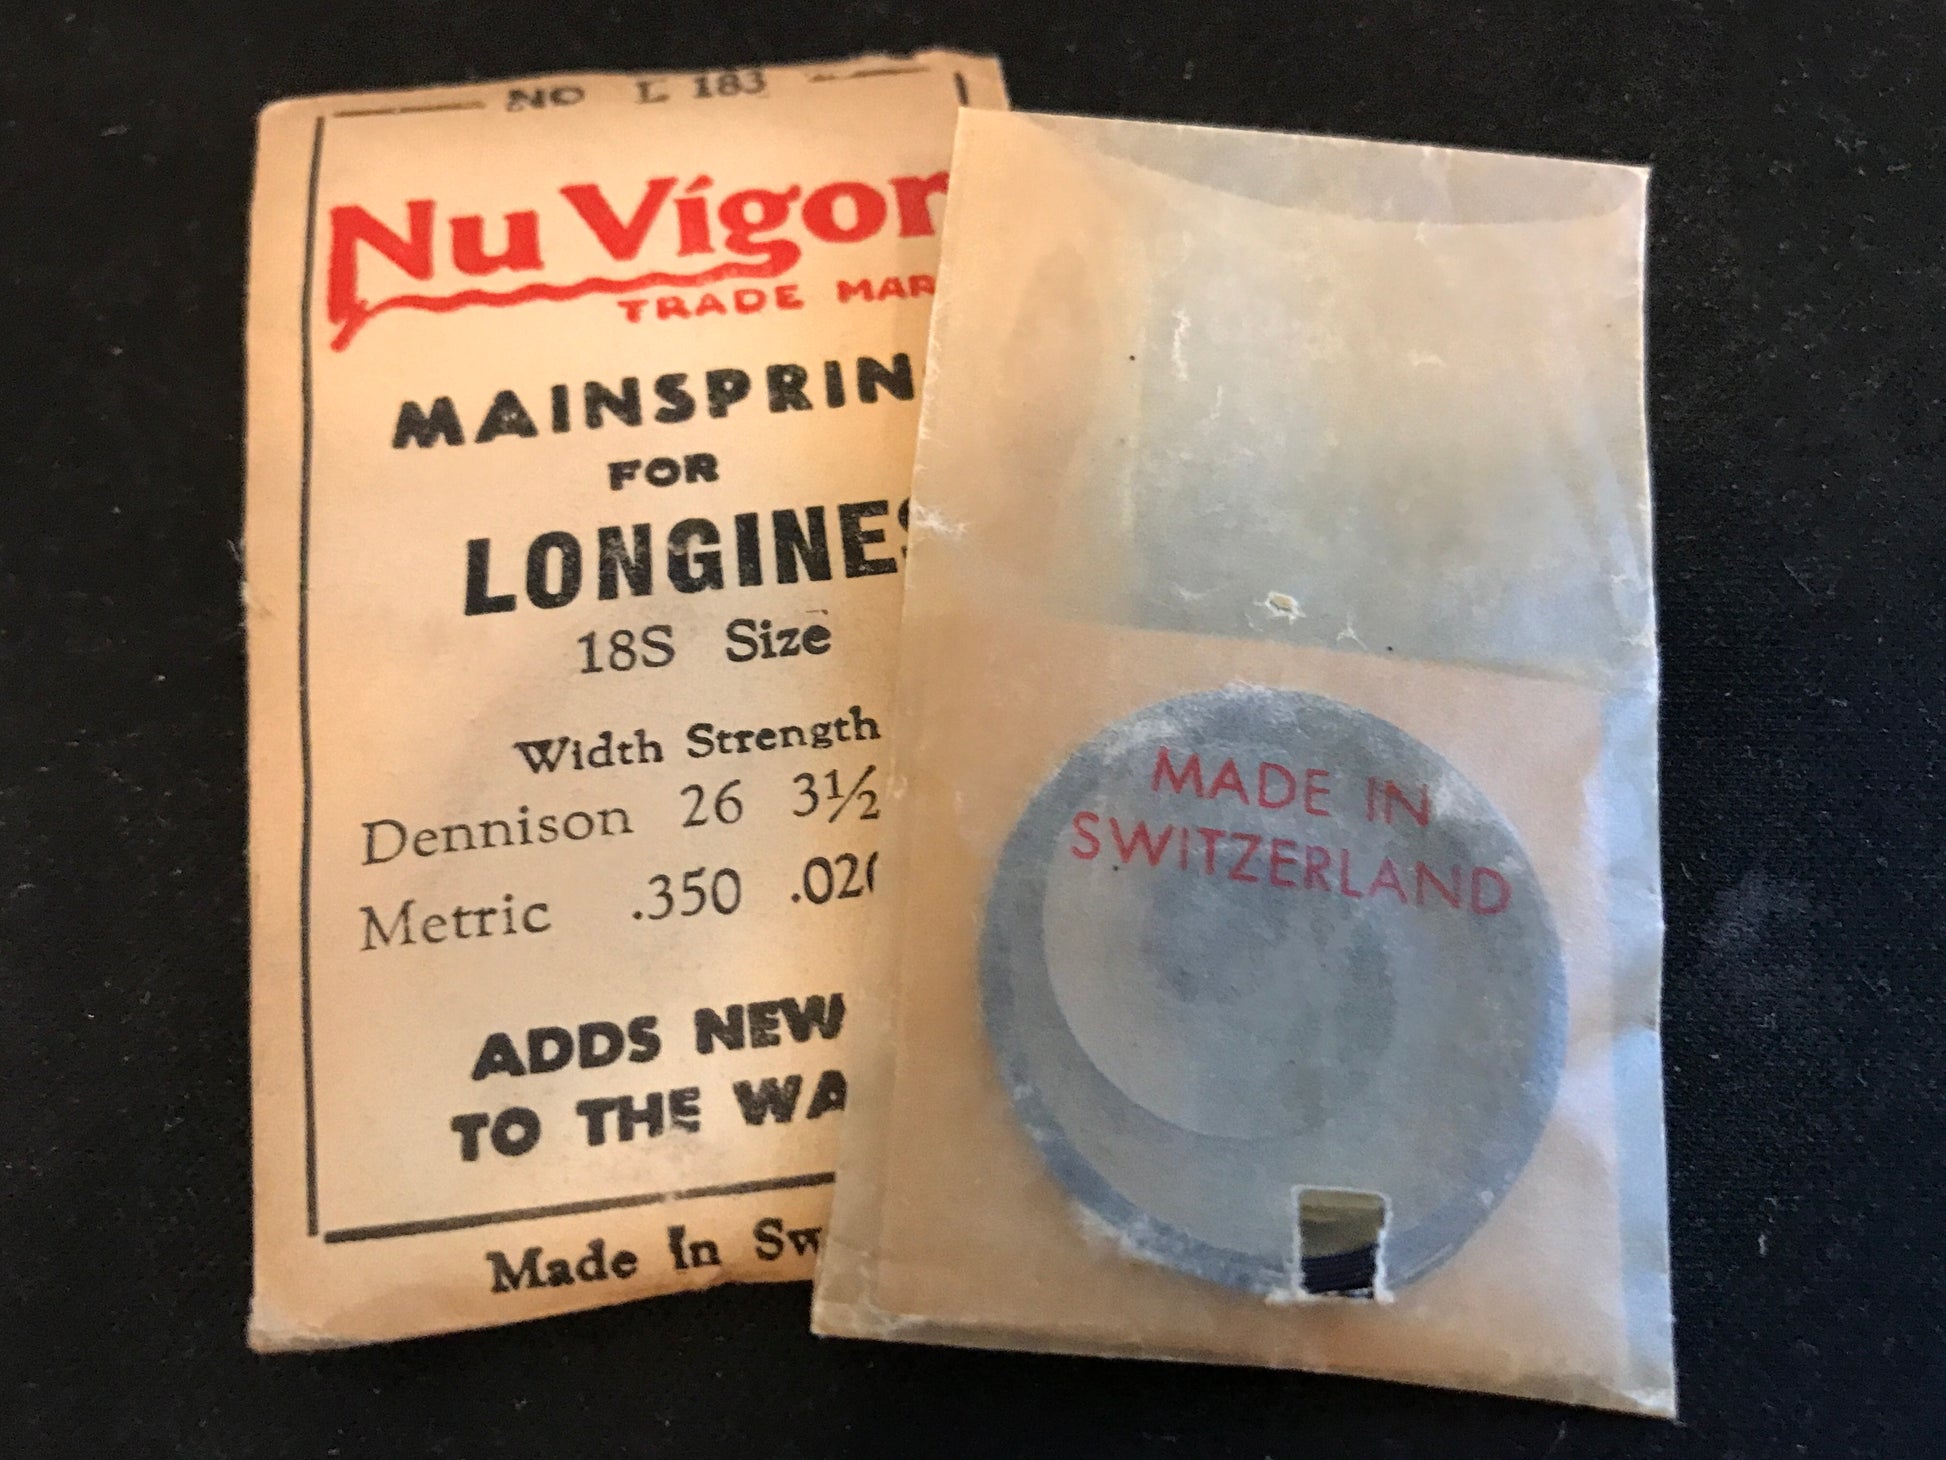 NuVigor Mainspring #L183 for Longines 18s movements - Steel